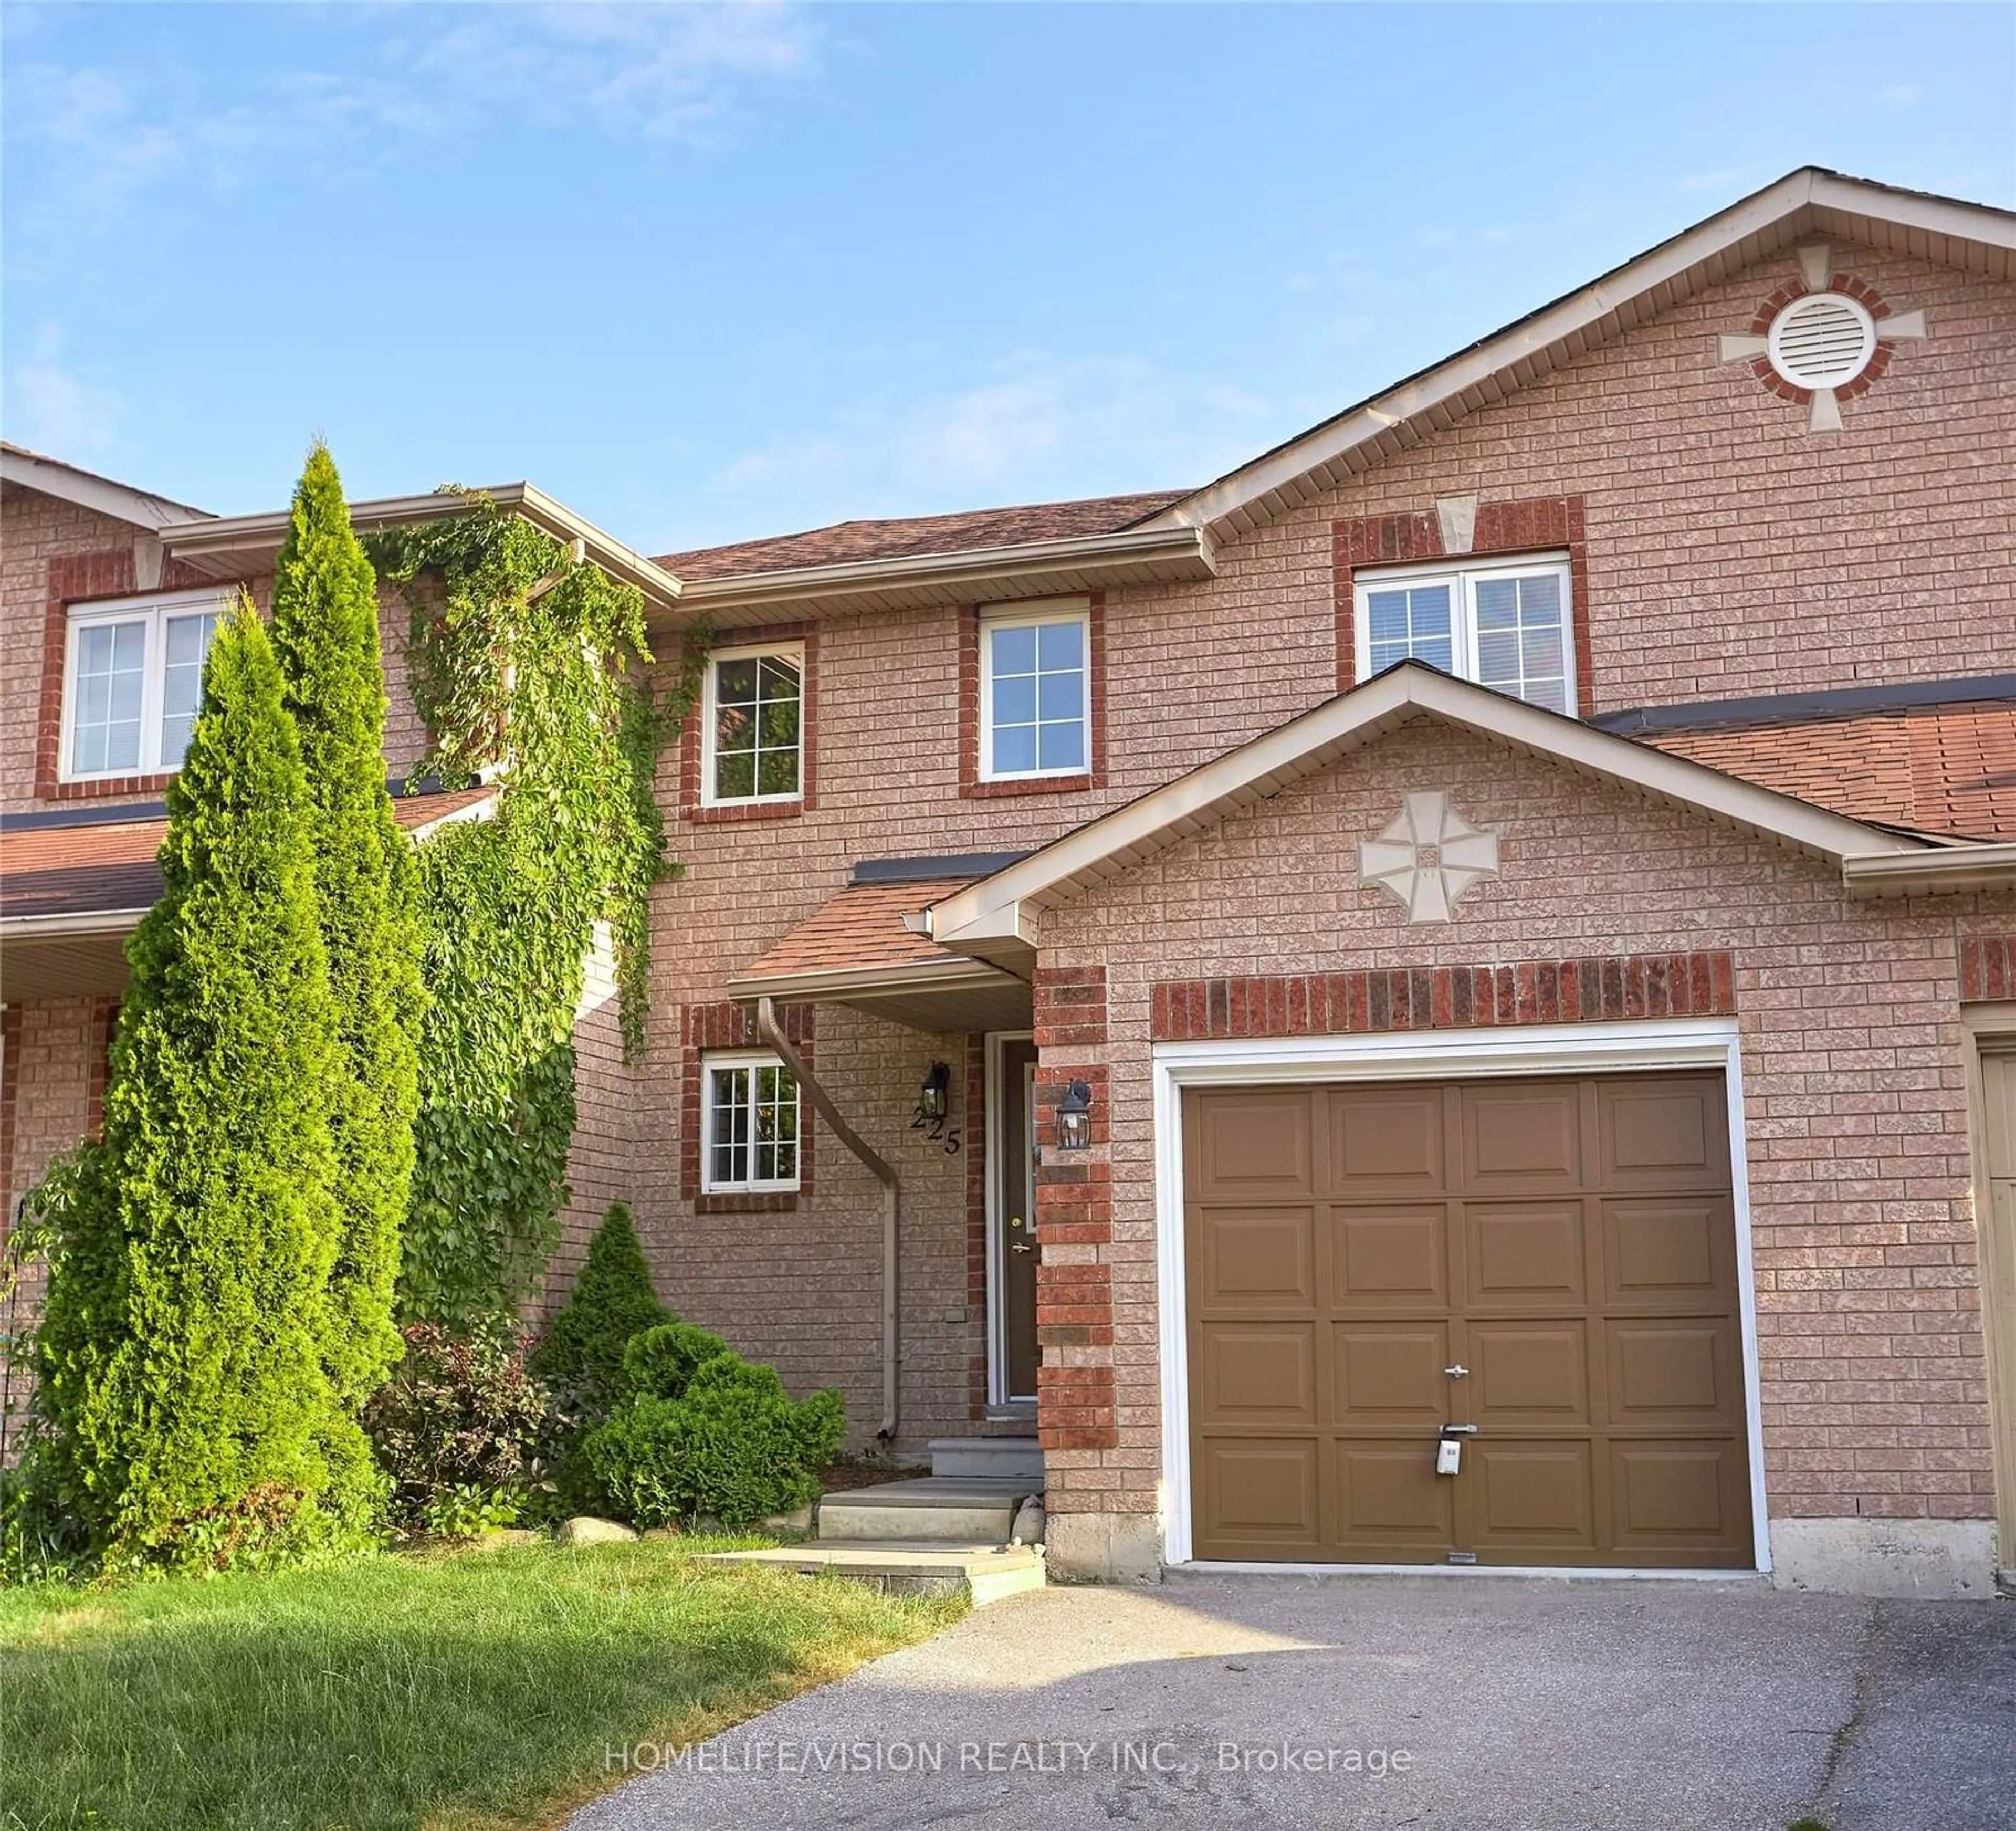 Home with brick exterior material for 225 TUNBRIDGE Rd, Barrie Ontario L4M 6R6